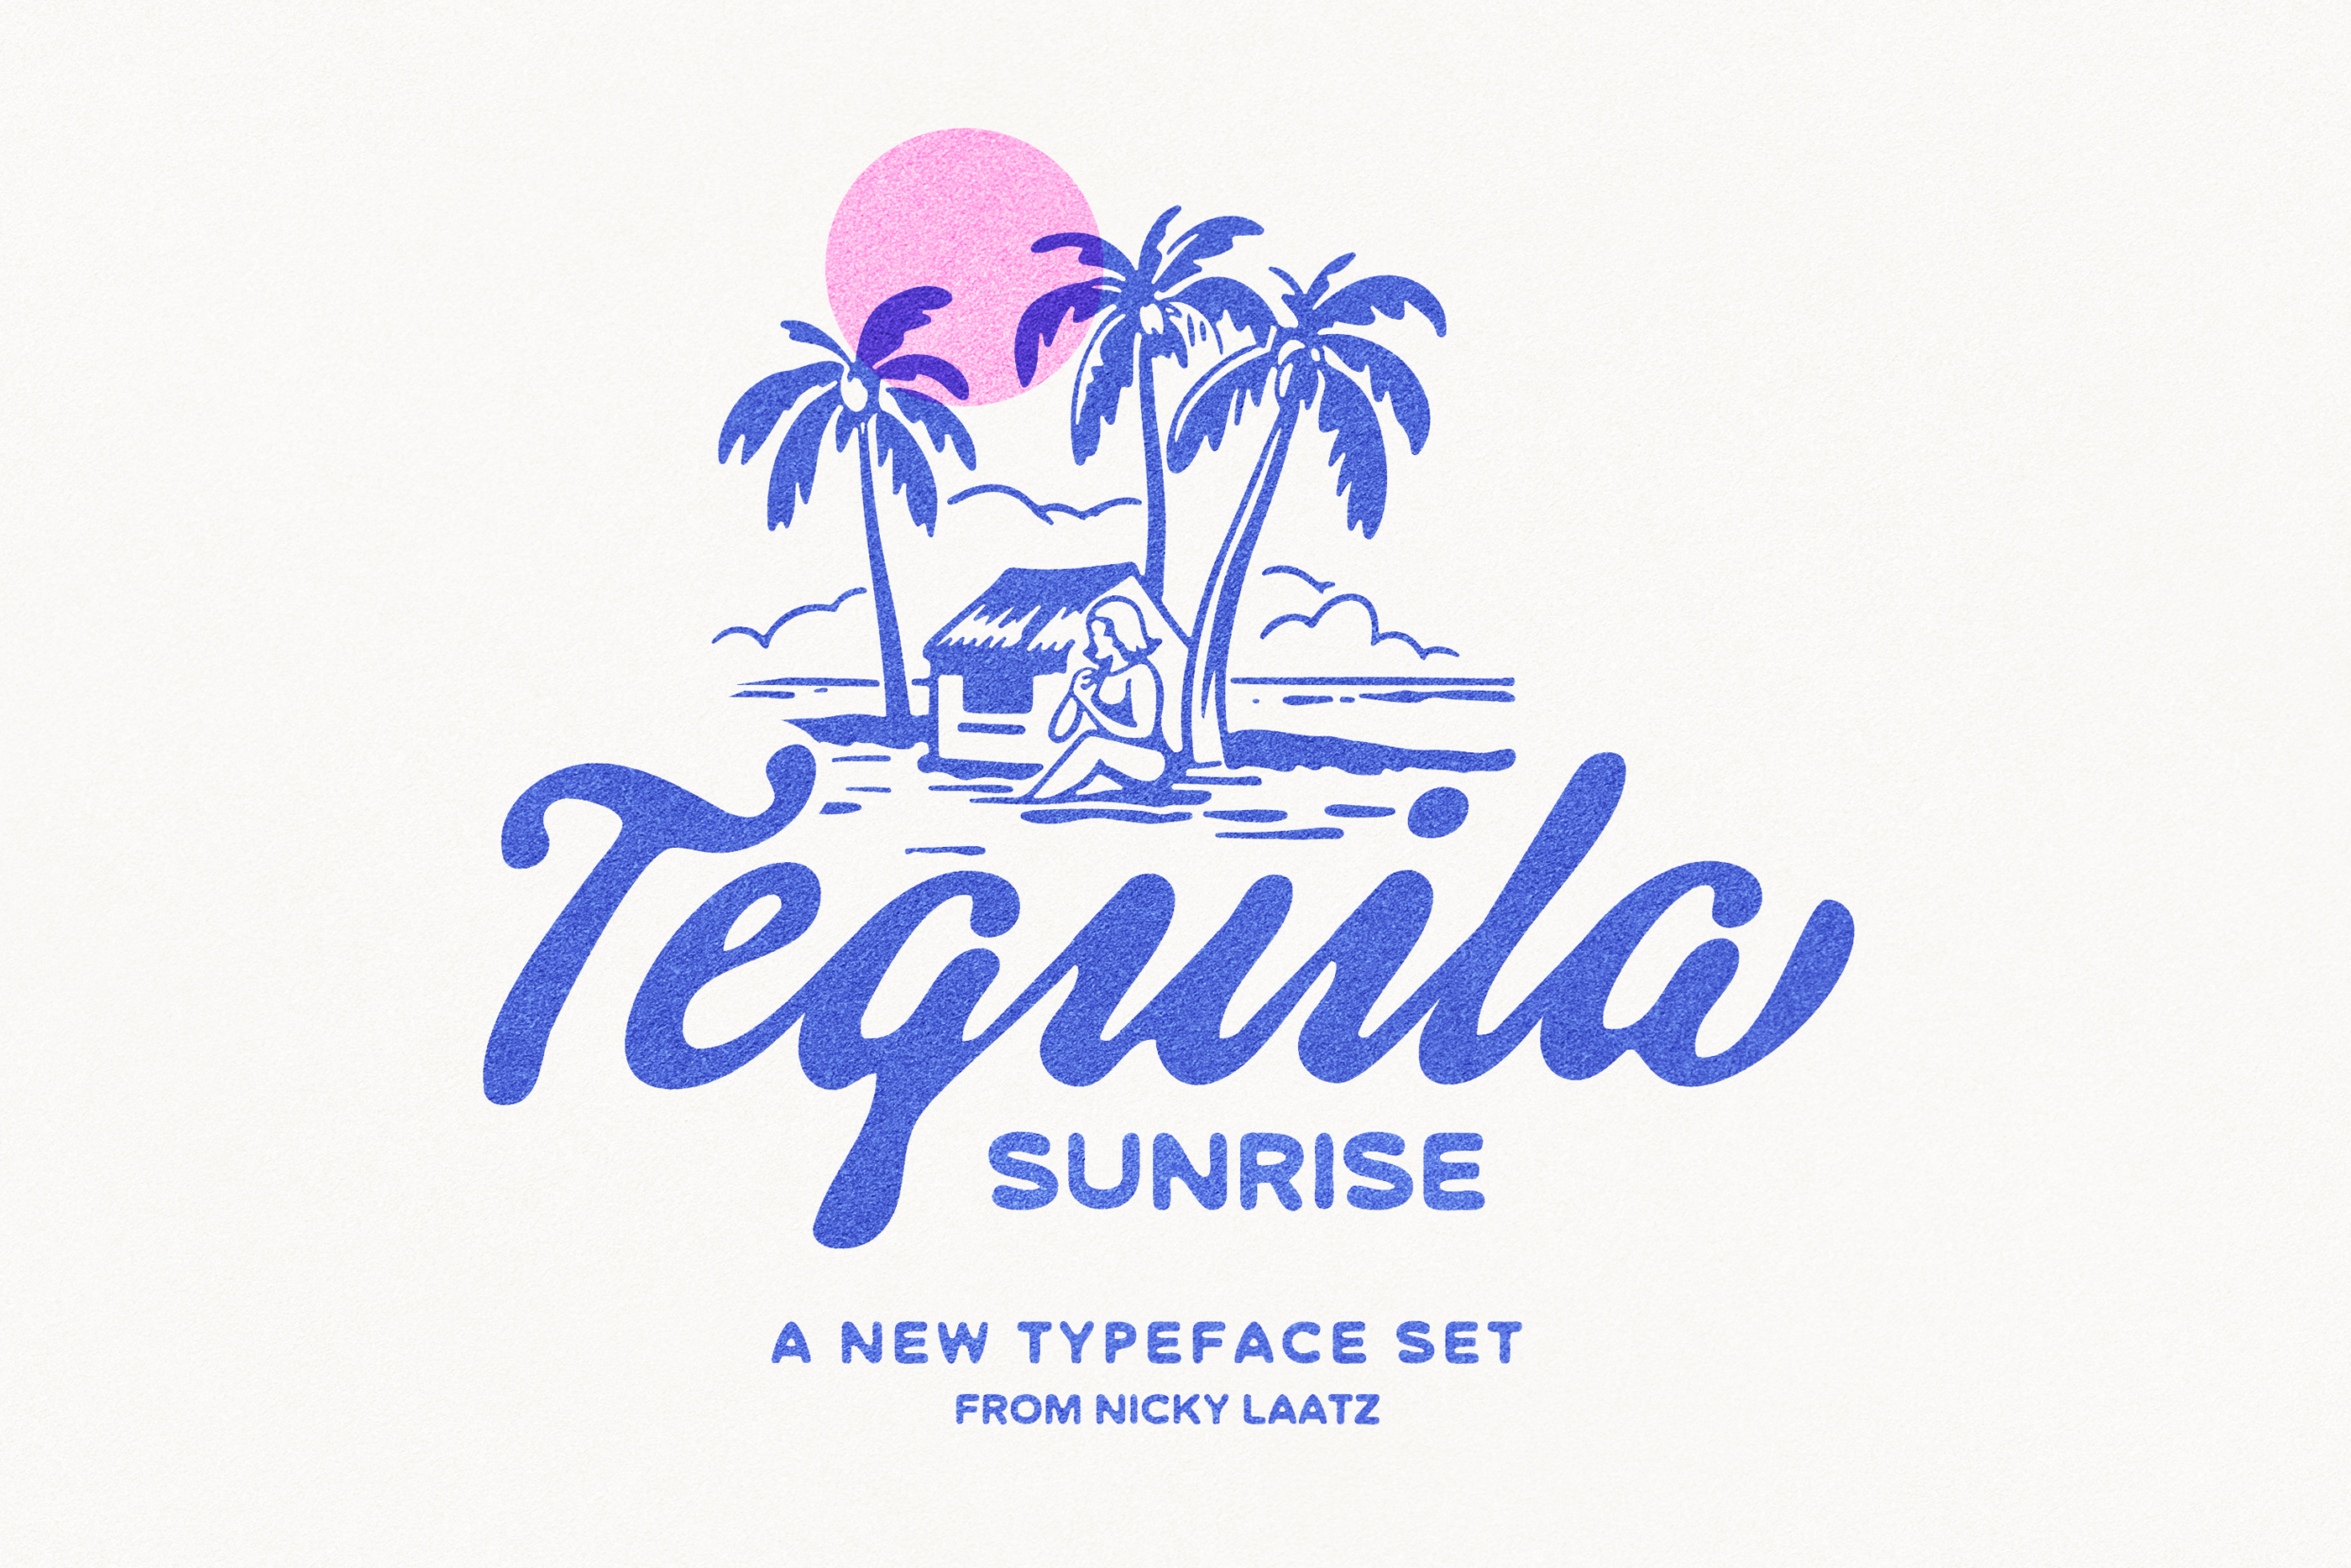 Tequila Sunrise Typeface Pack (Font) by Nicky Laatz